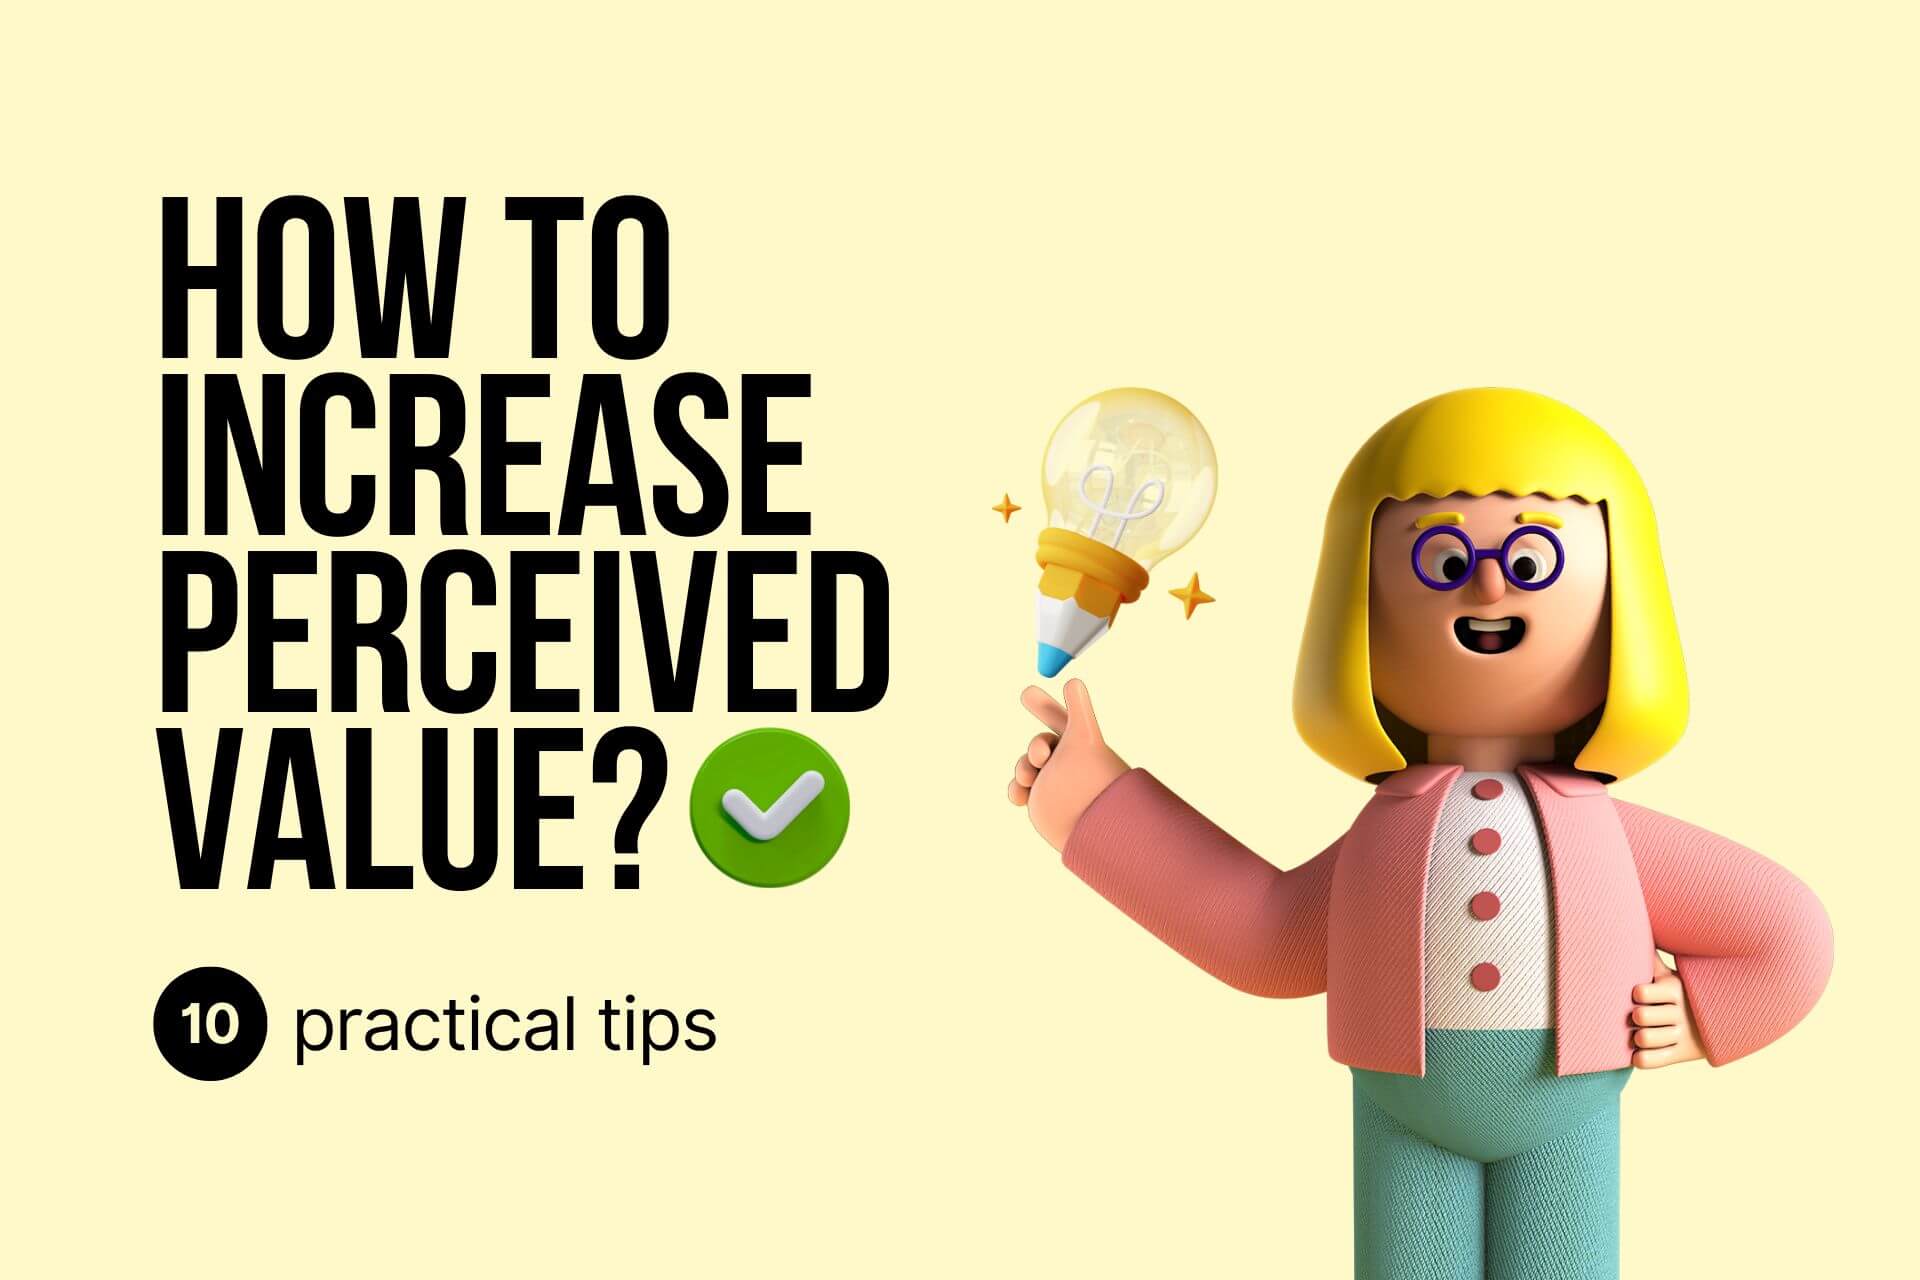 How to Increase Perceived Value? 10 Practical Tips